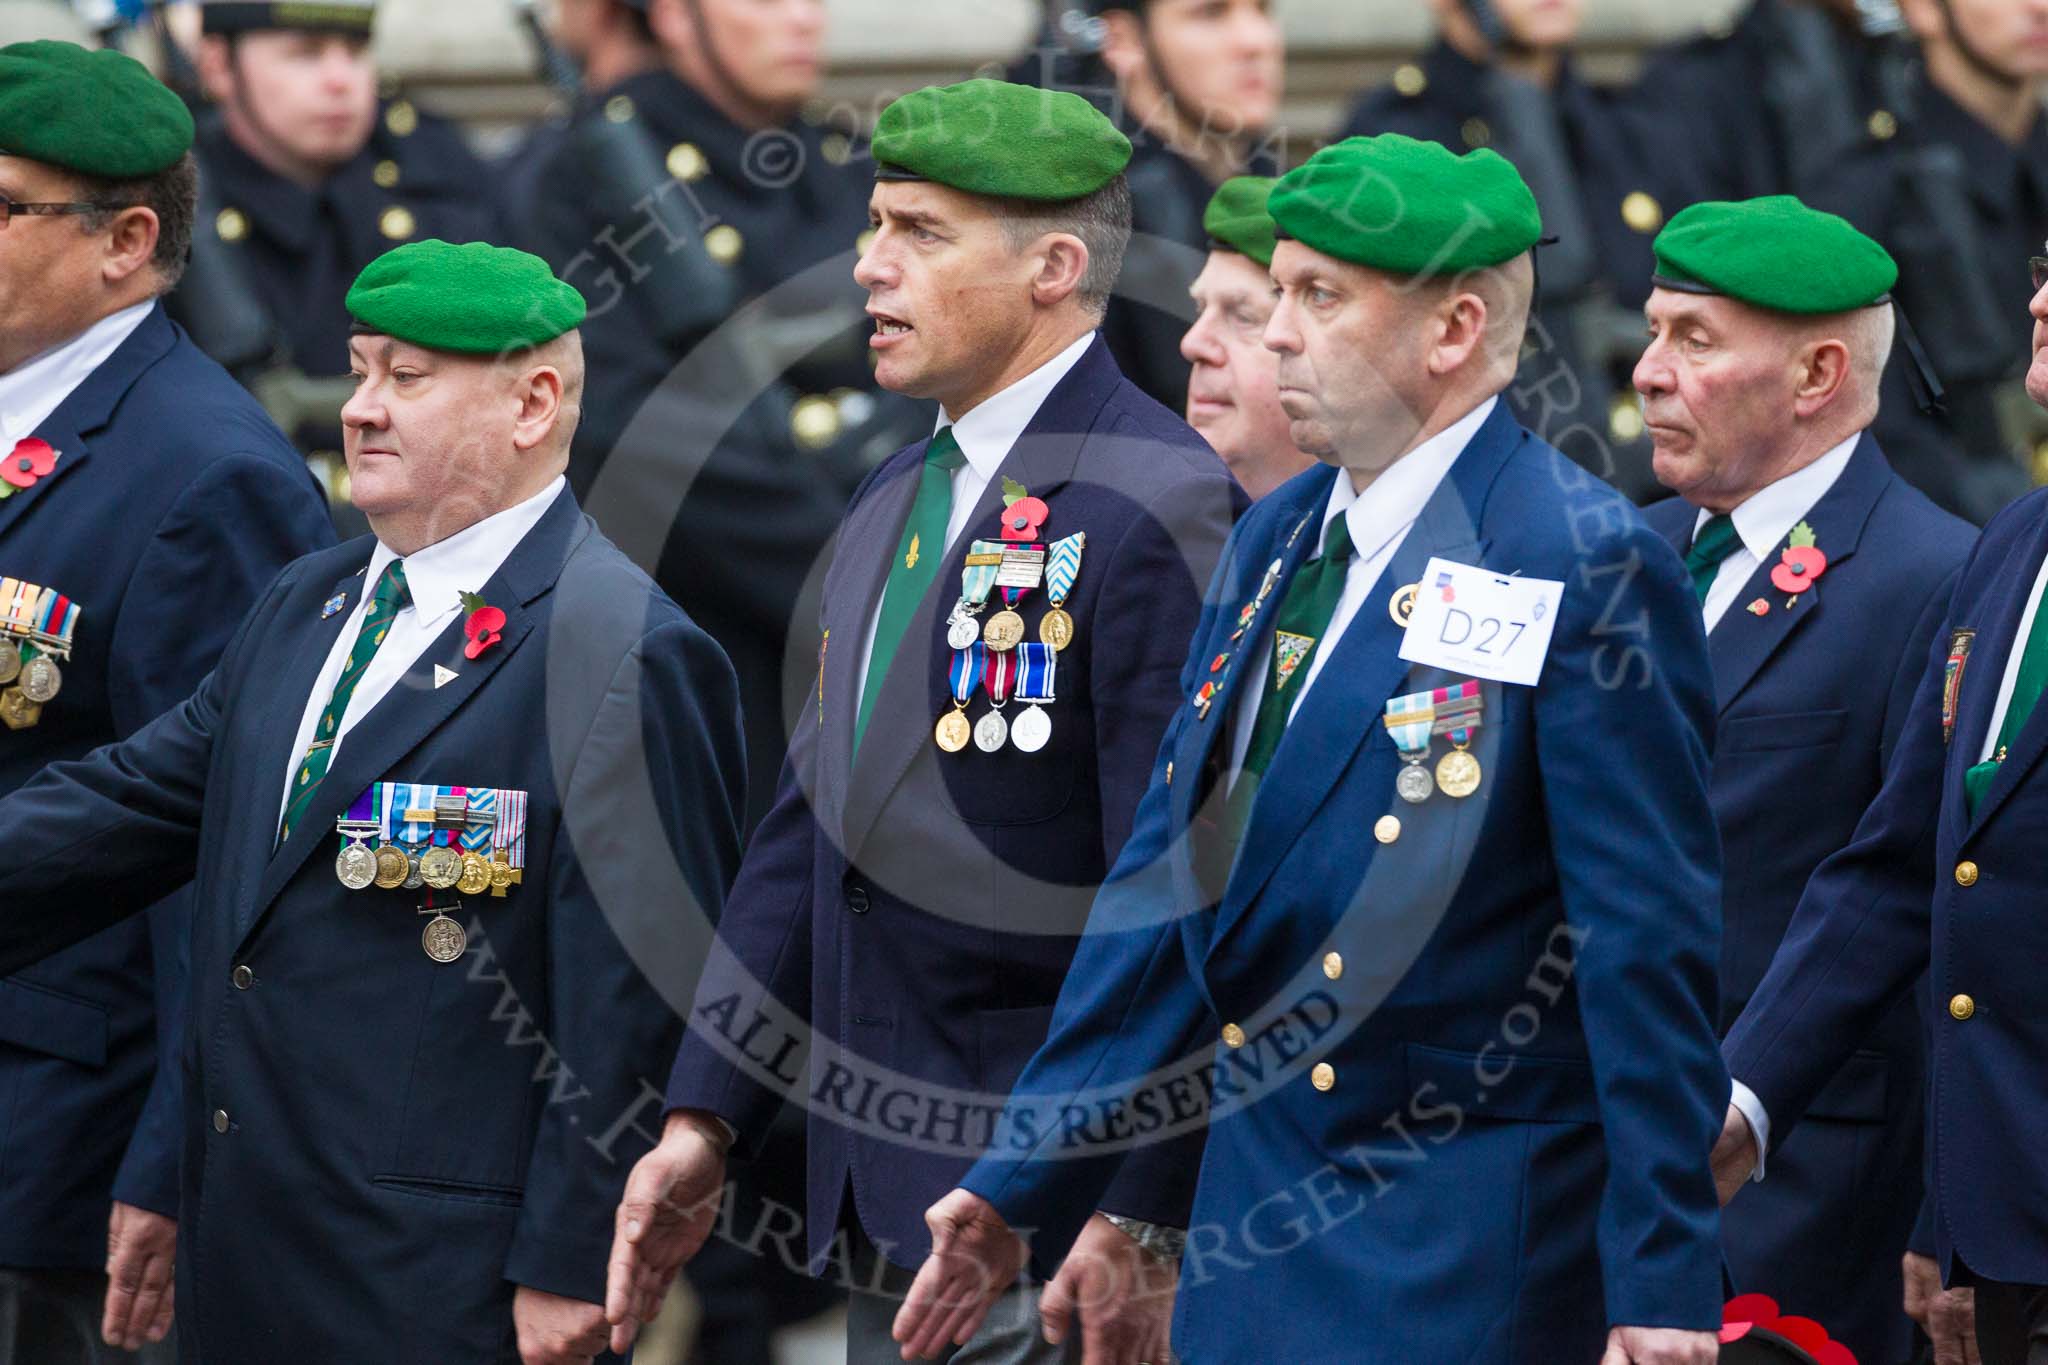 Remembrance Sunday at the Cenotaph 2015: Group D27, Foreign Legion Association.
Cenotaph, Whitehall, London SW1,
London,
Greater London,
United Kingdom,
on 08 November 2015 at 11:56, image #740